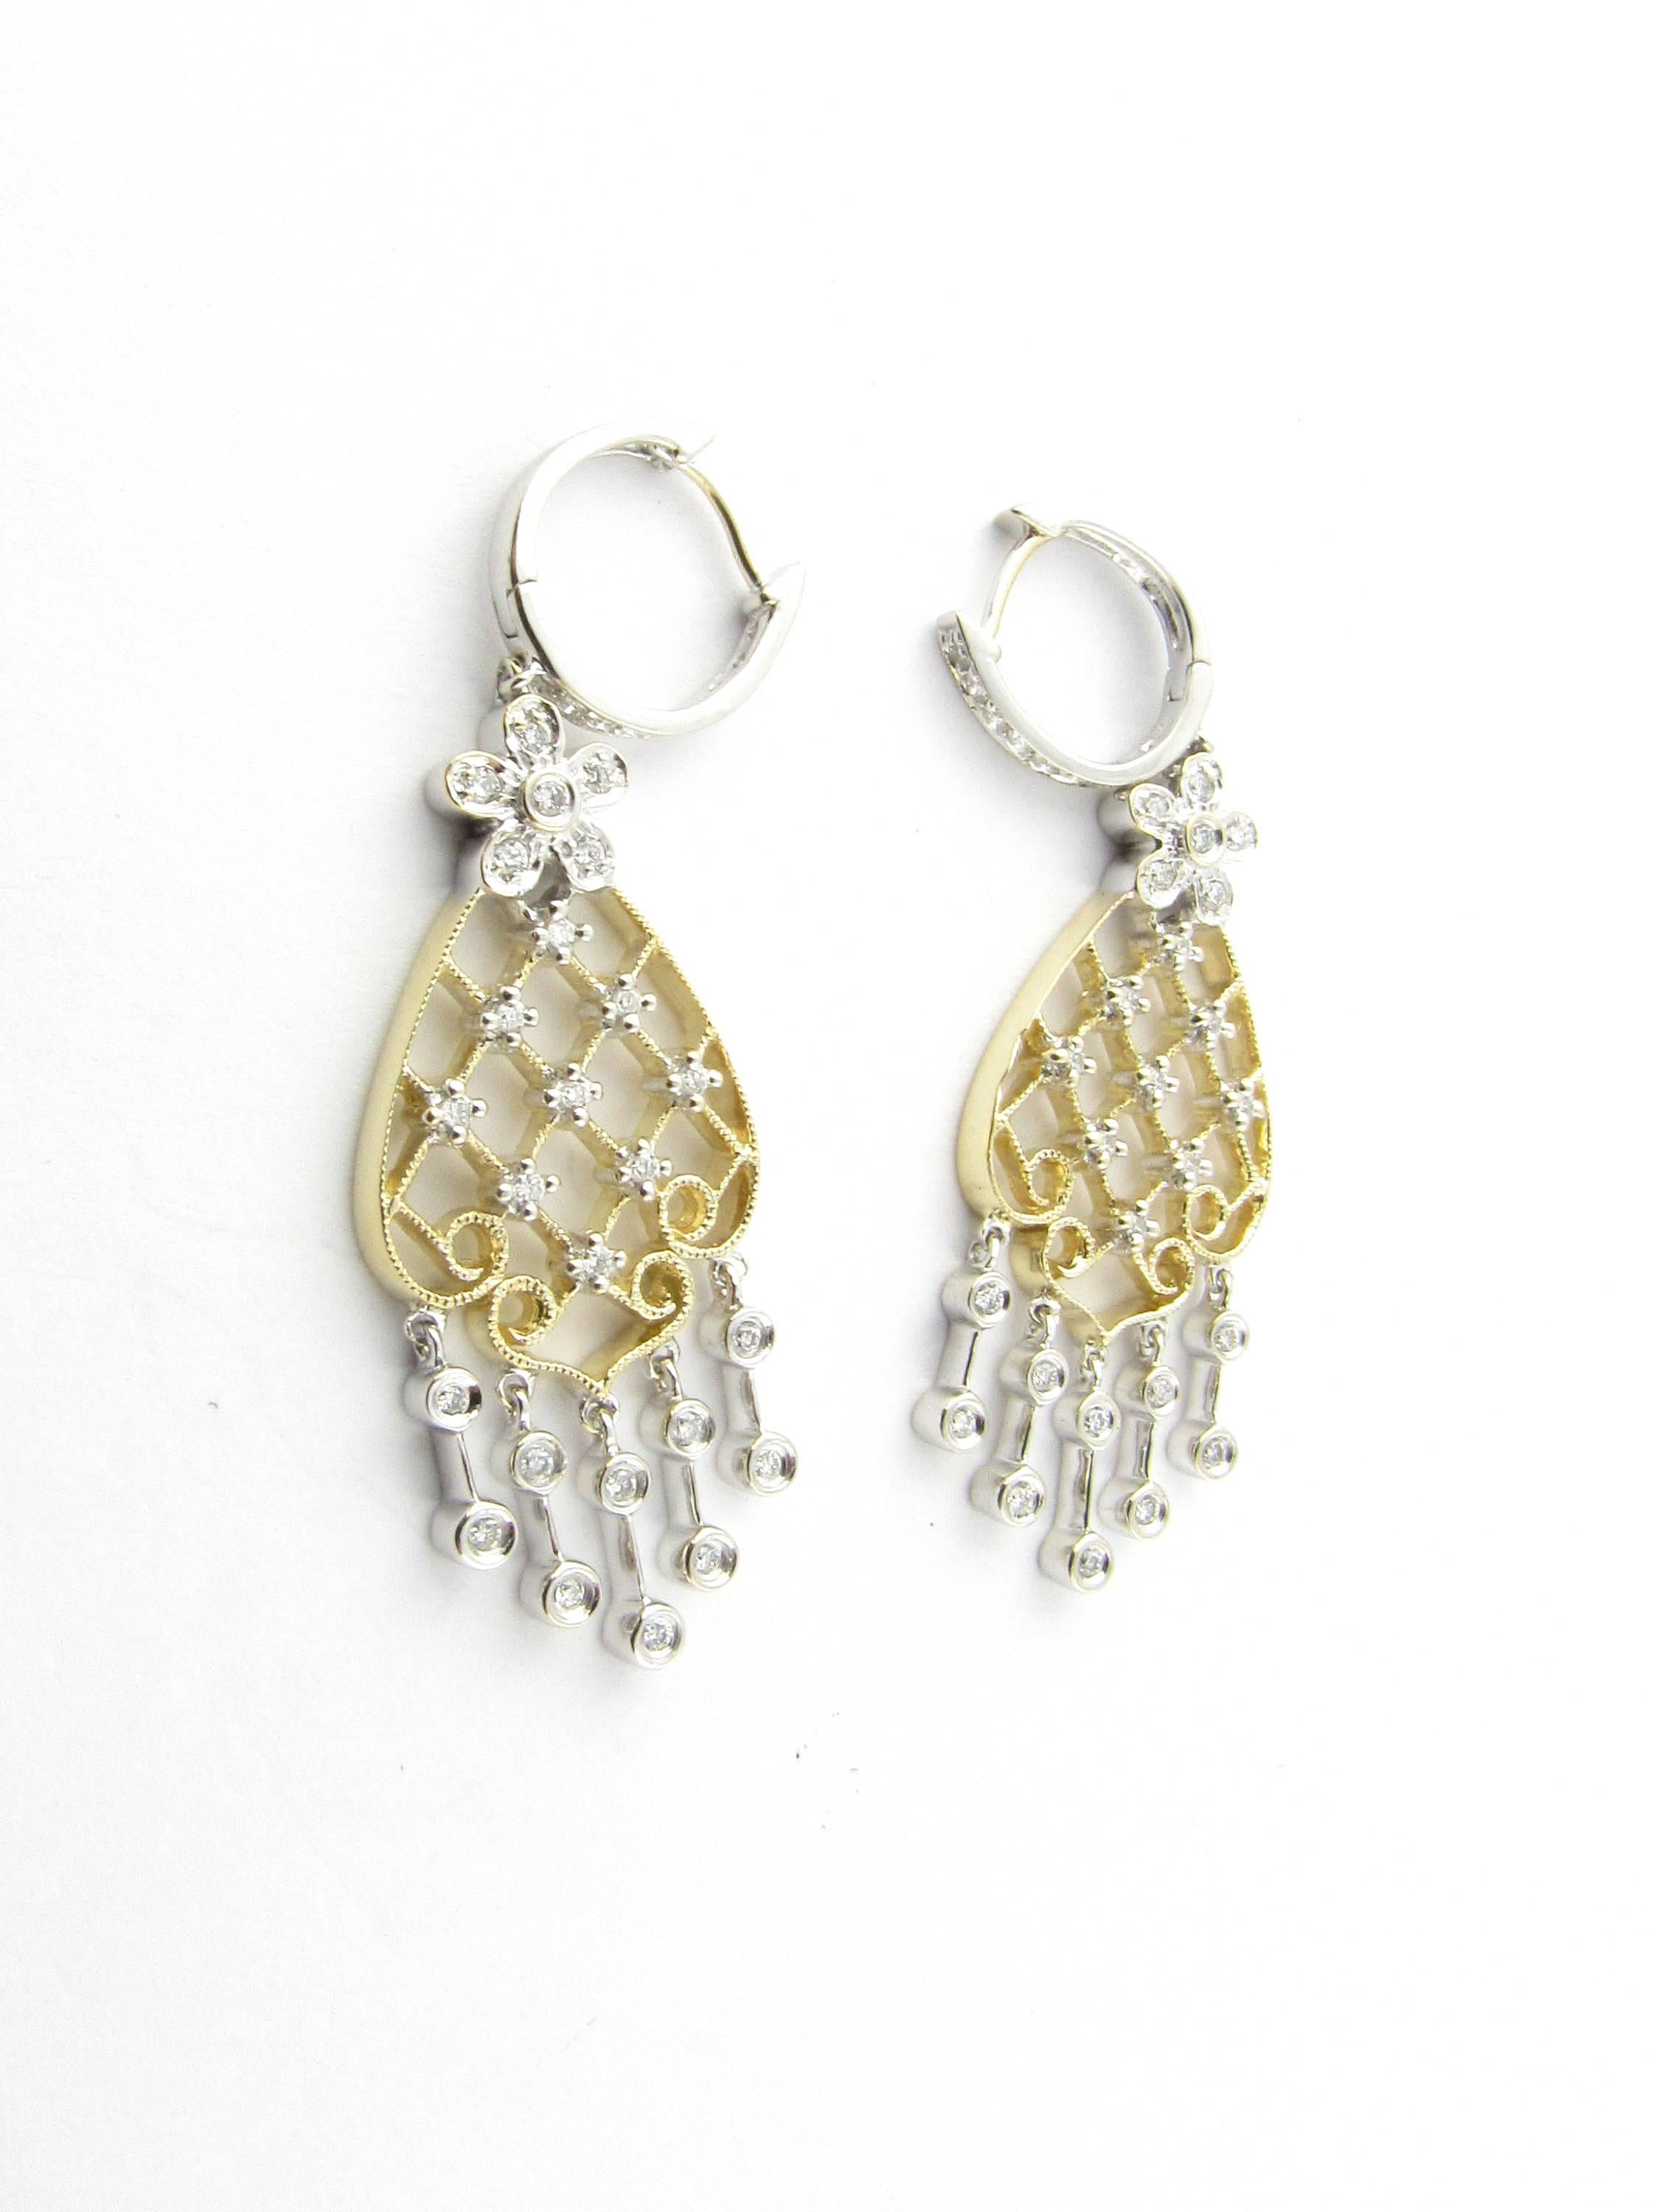 Vintage 14 Karat White and Yellow Gold Diamond Chandelier Earrings- 
These dazzling chandelier earrings each feature 34 round brilliant cut diamonds set in stunning white and yellow gold. 
Approximate total diamond weight: 1.40 ct. 
Diamond color: